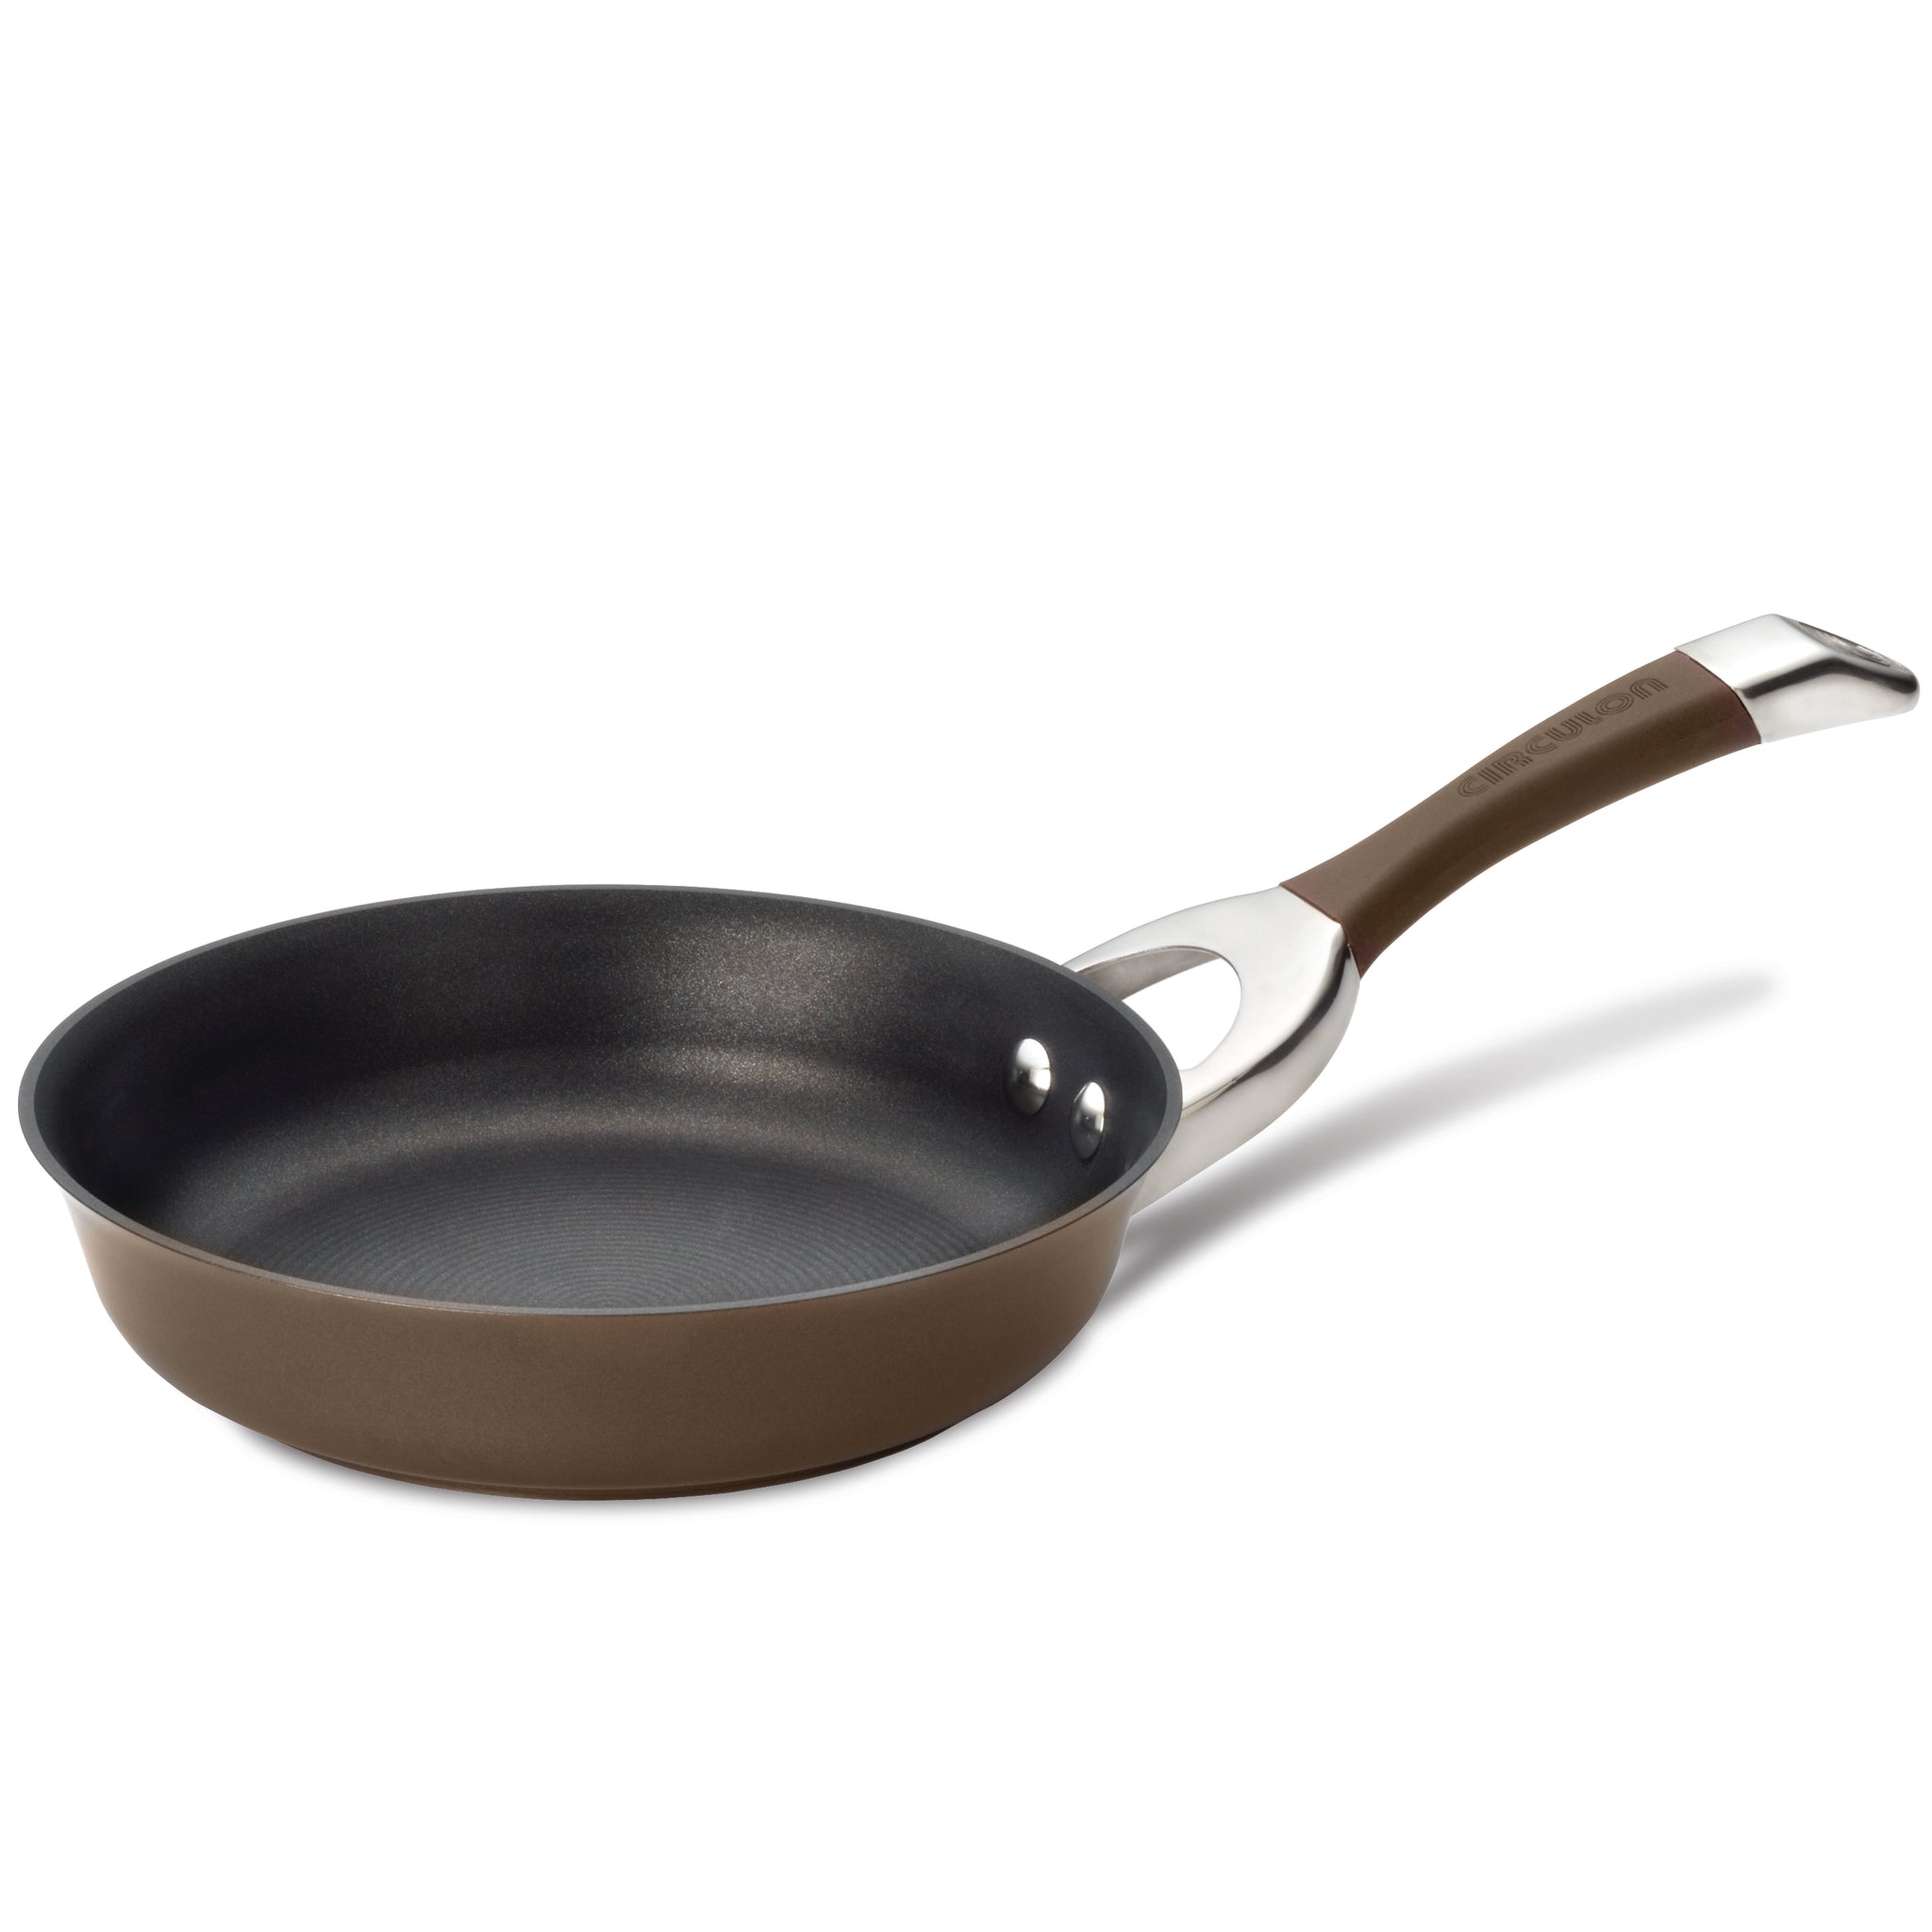 Circulon Symmetry Hard Anodized Nonstick Cookware Utensil and